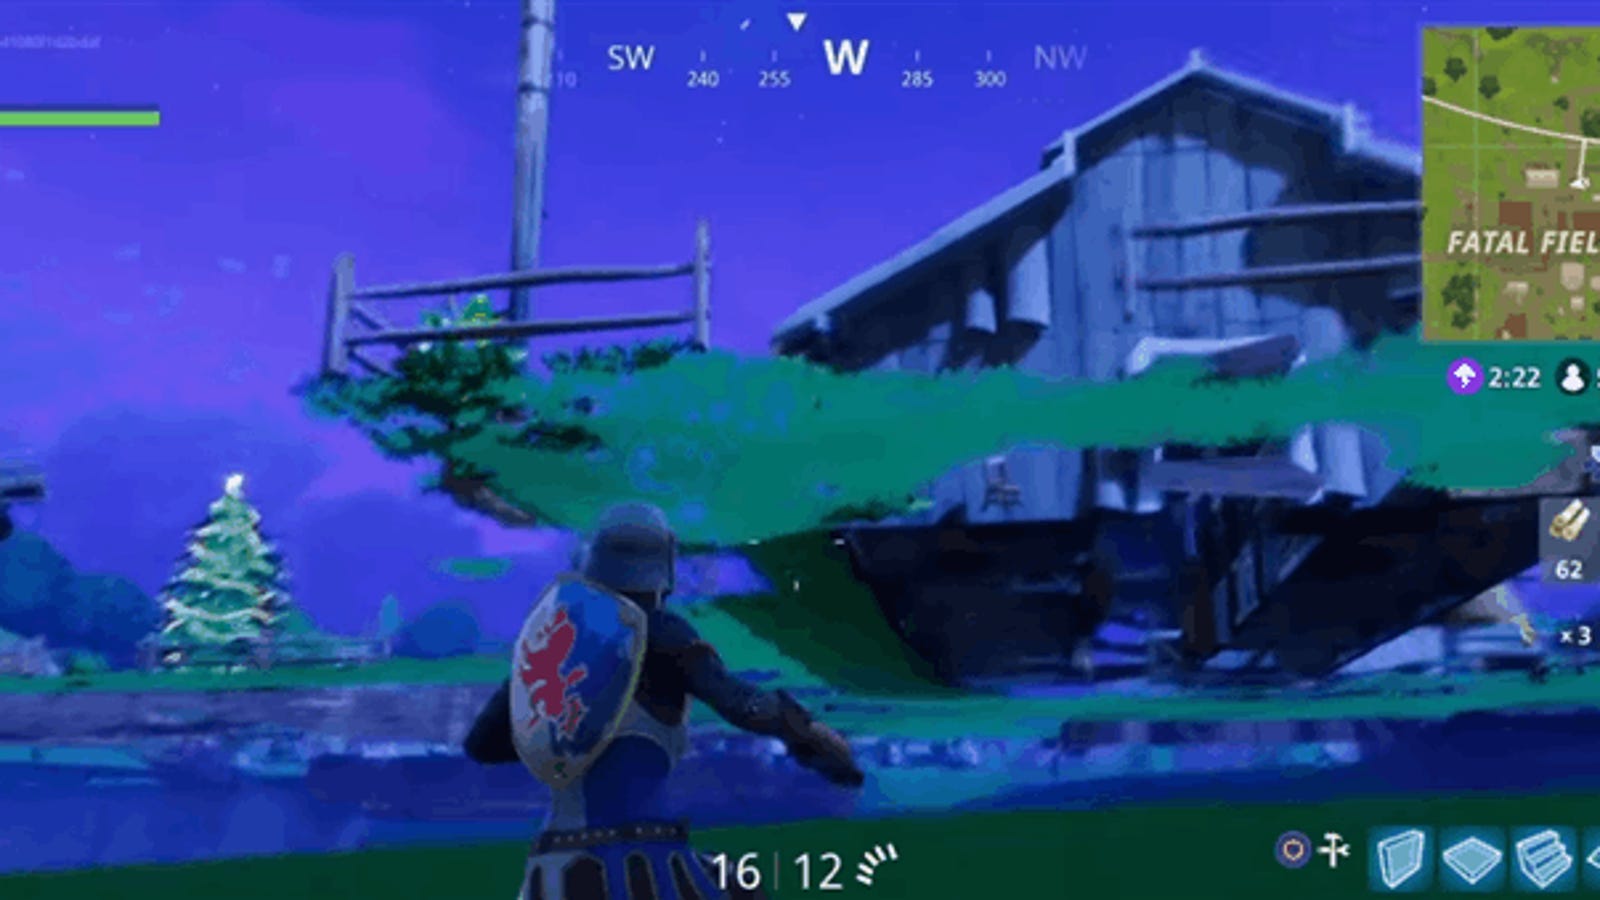 Fortnite Players Have Found A Way To Glitch Under The Map And Keep - fortnite players have found a way to glitch under the map and keep killing update